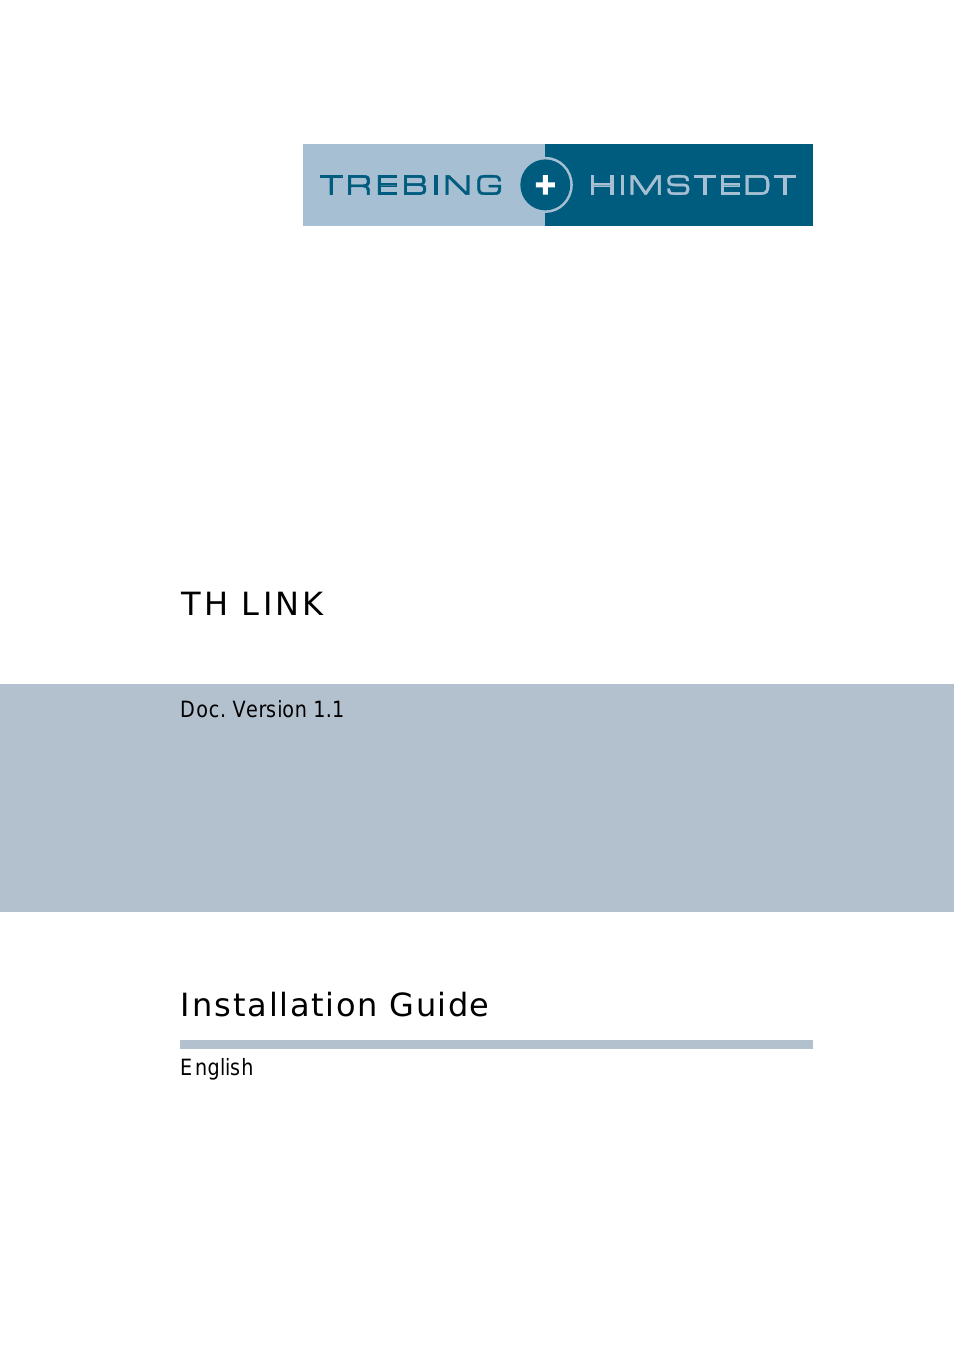 TH LINK Version 1.1 Installation Guide